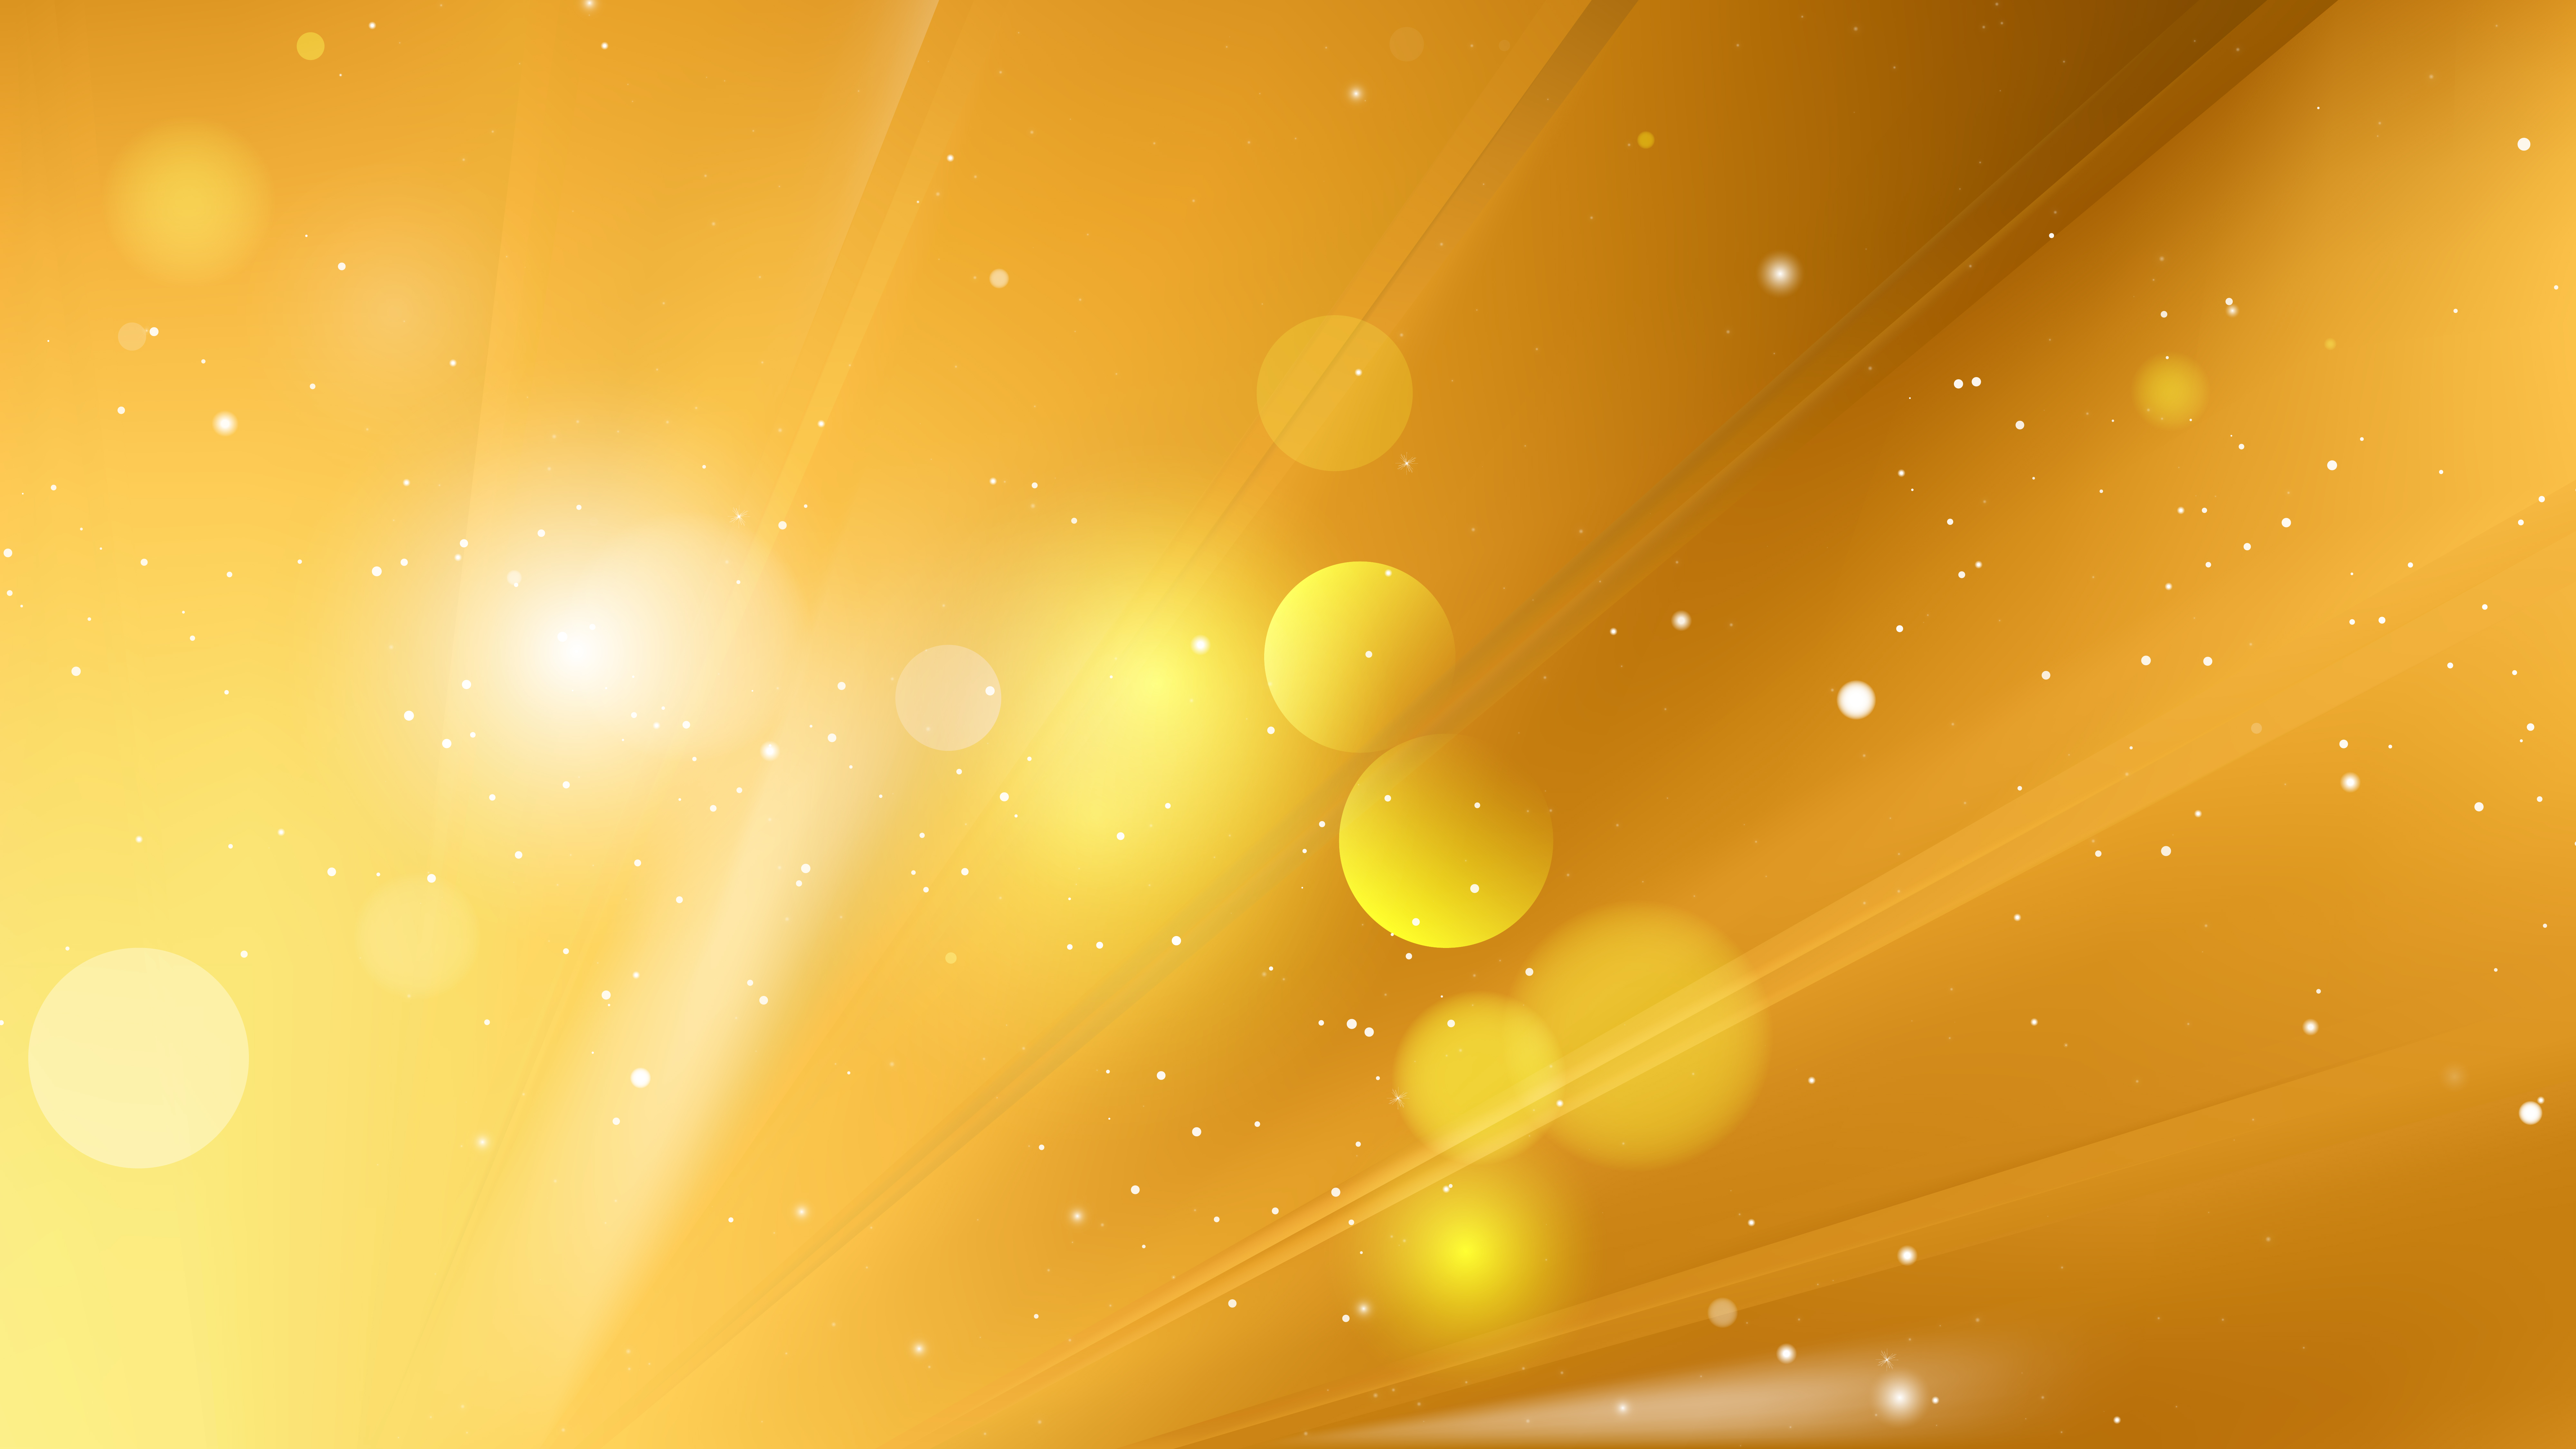 Gold Abstract Background  Free image on Pixabay